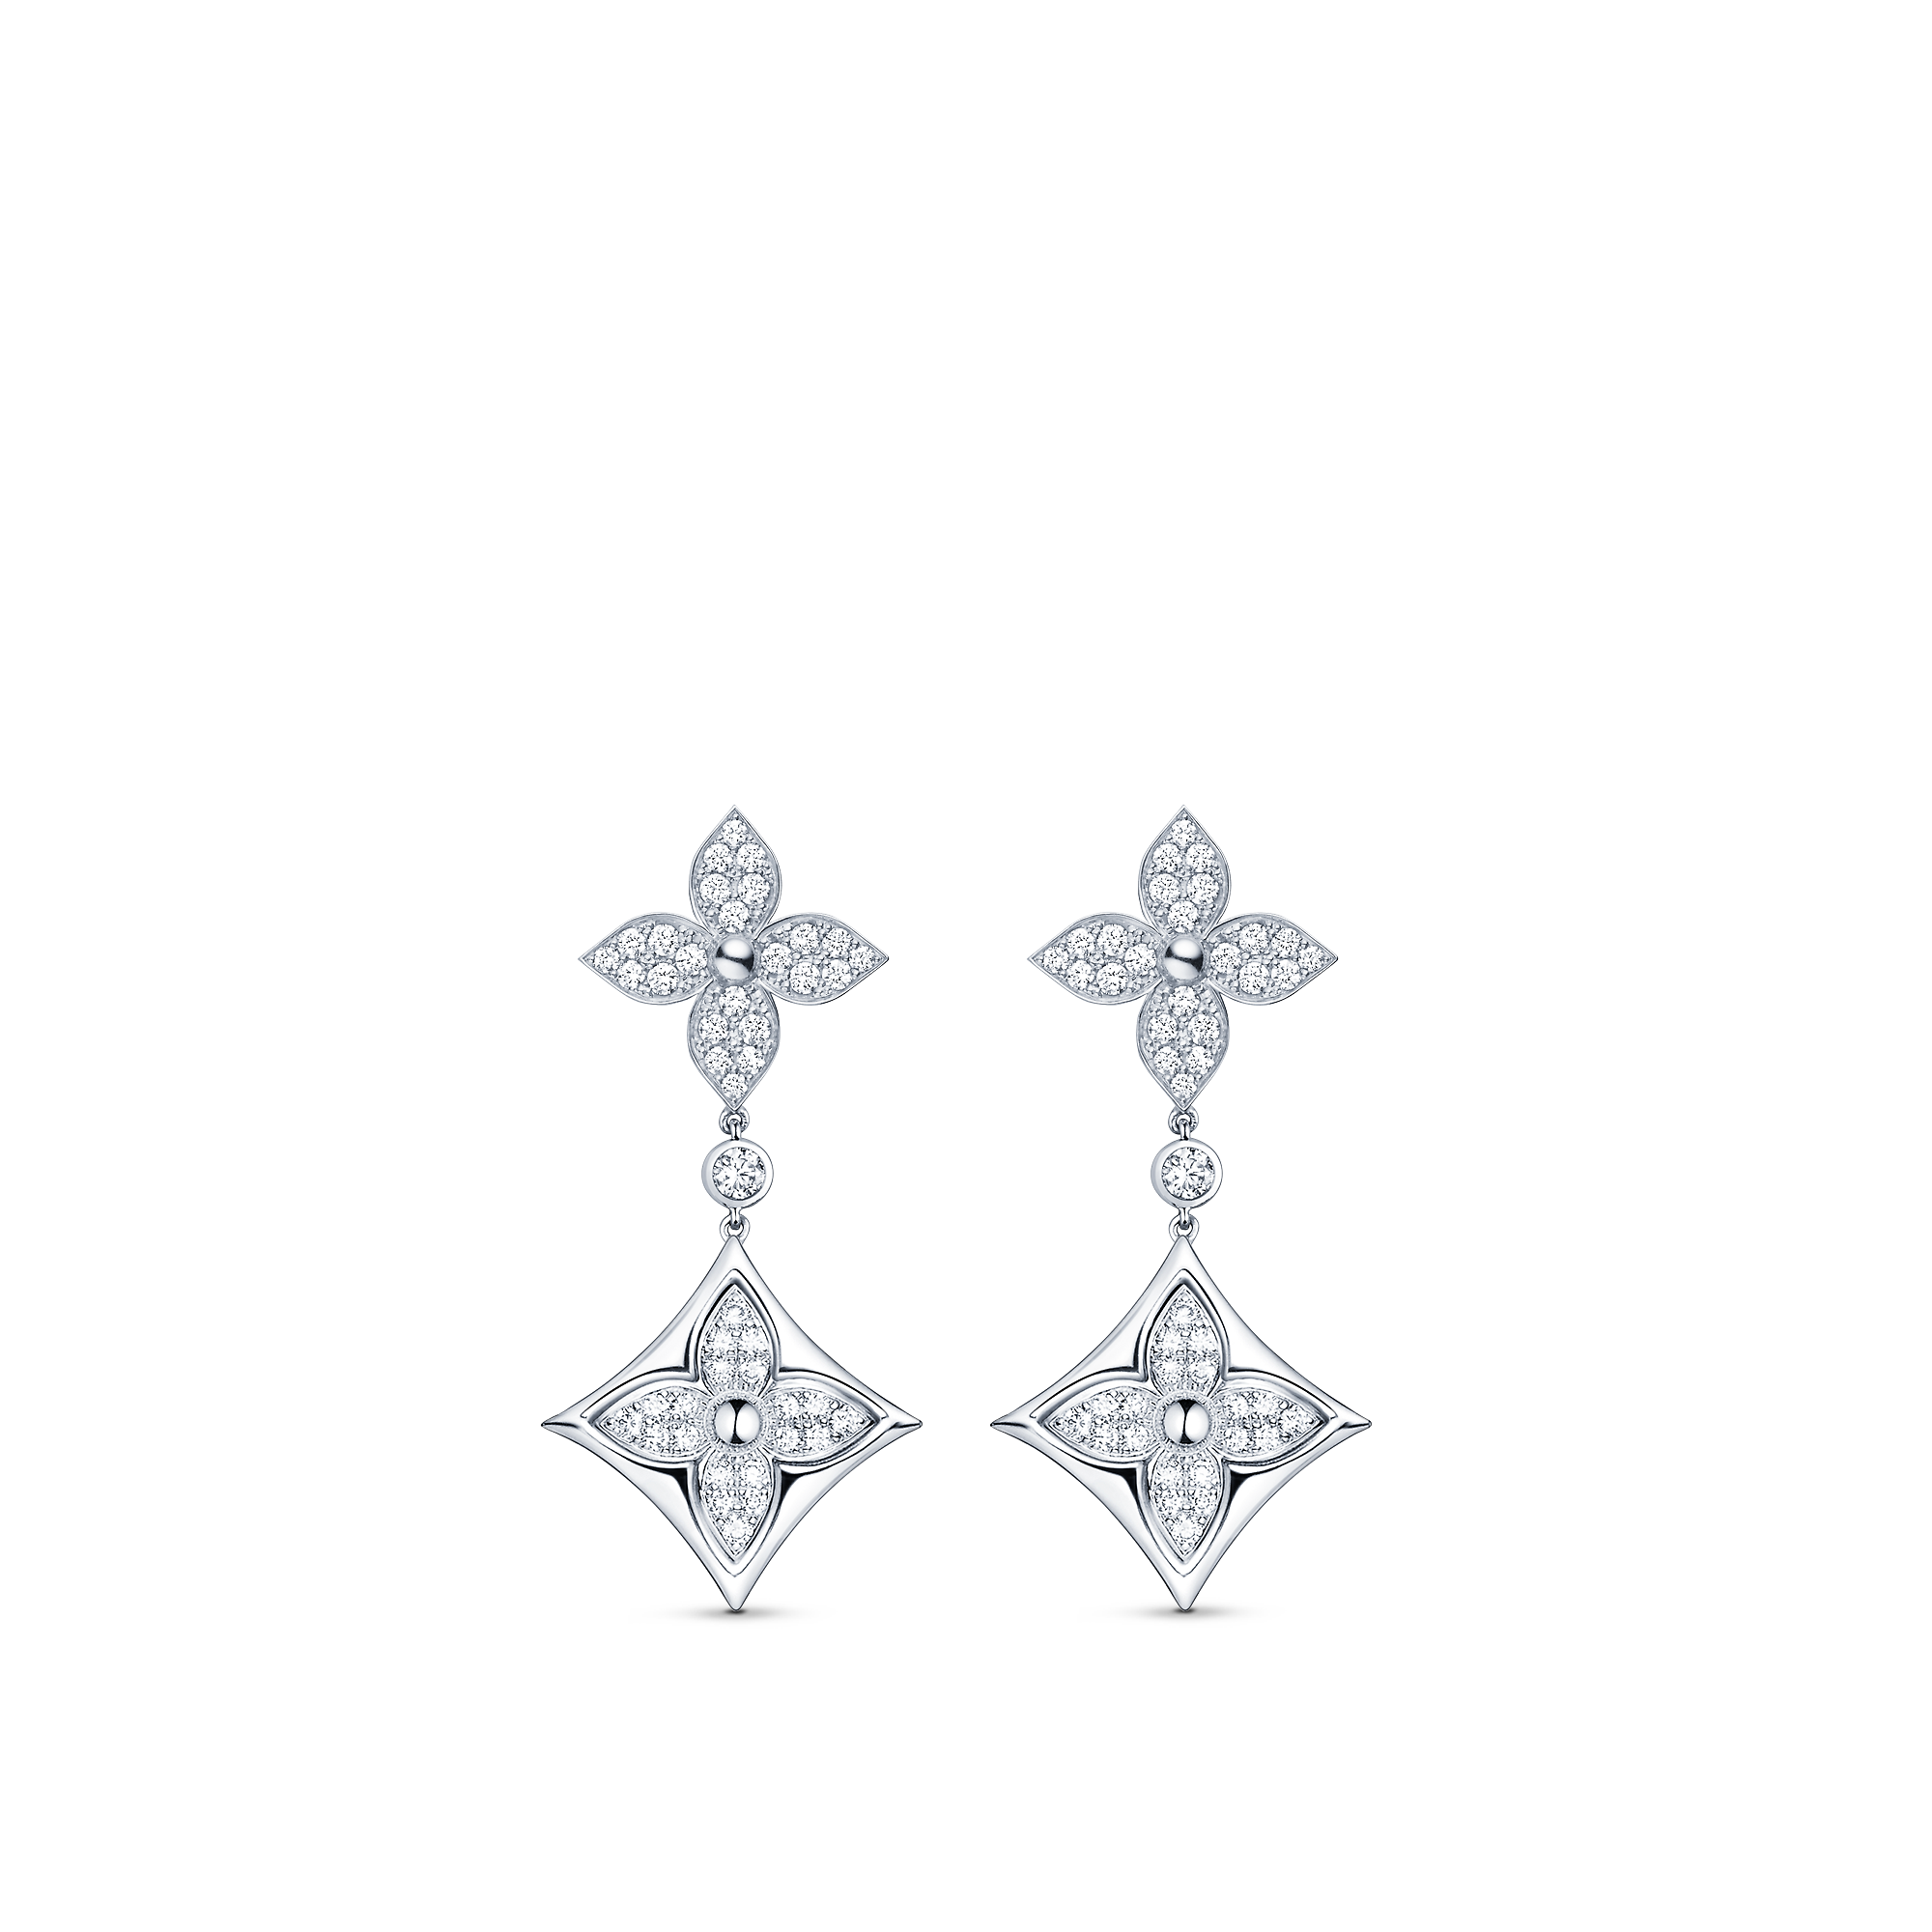 Louis Vuitton Color Blossom Long Earrings, White Gold And Diamonds – Jewelry – Categories Q96501